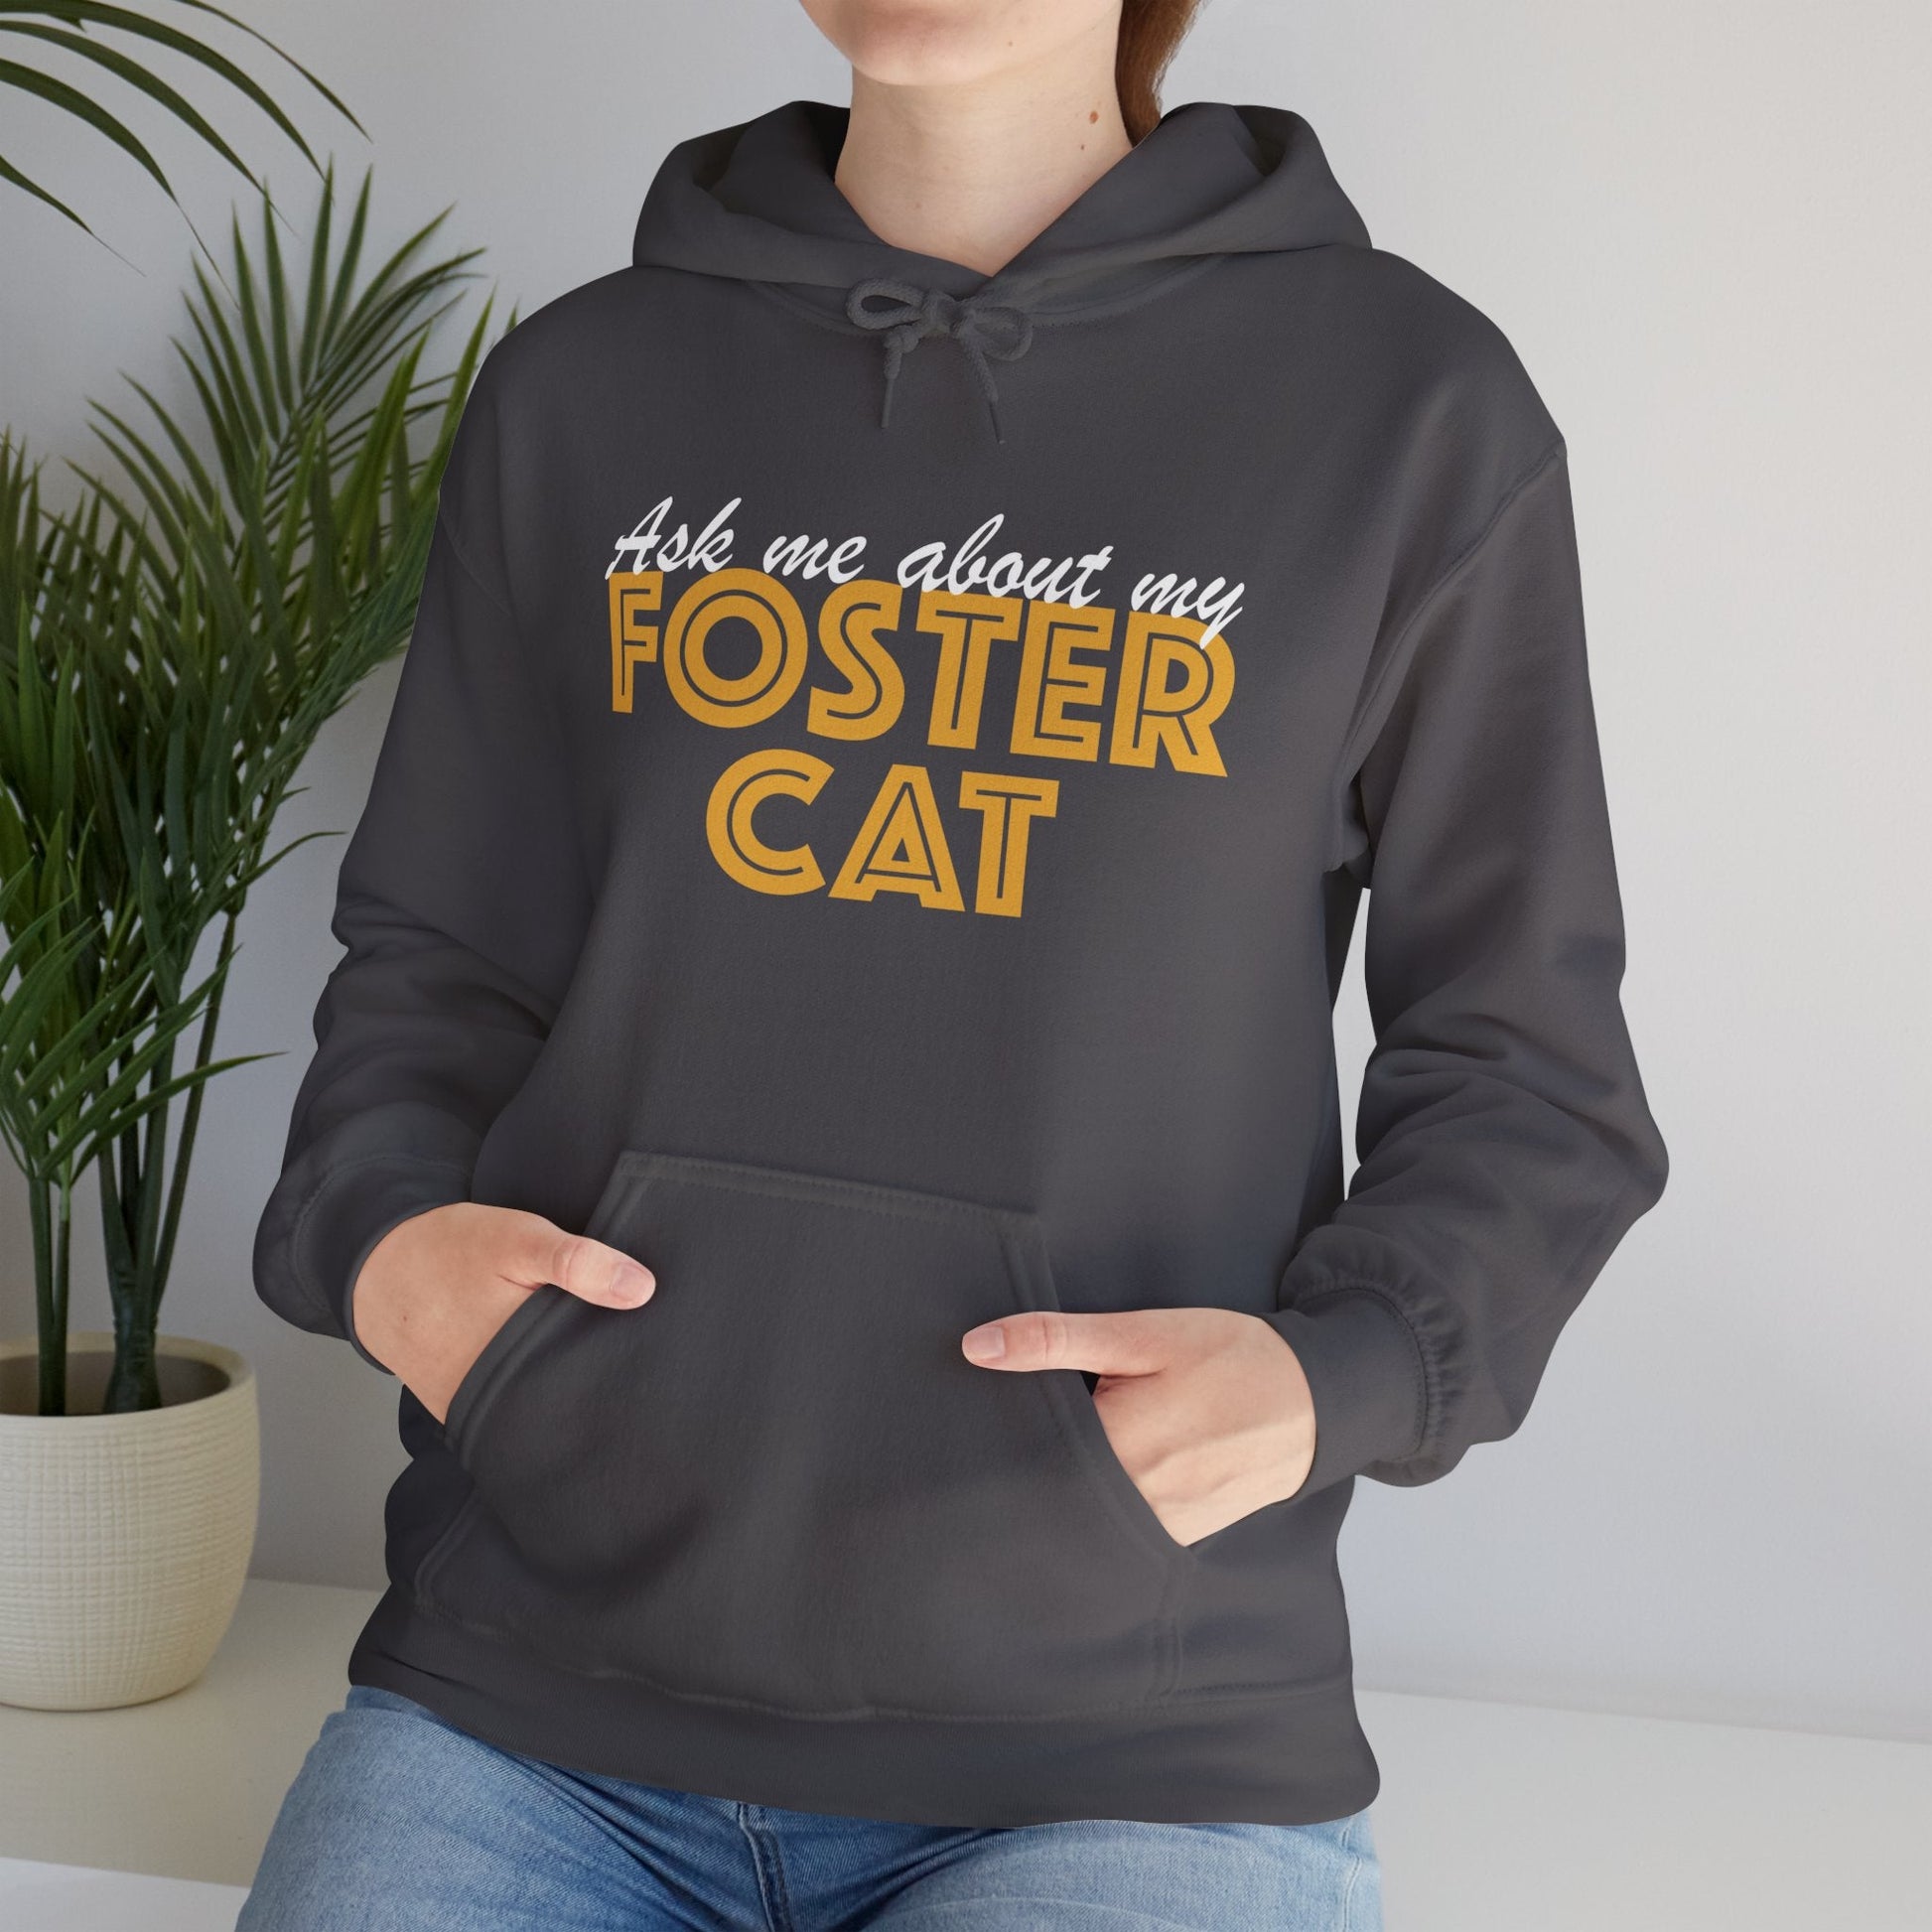 Ask Me About My Foster Cat | Hooded Sweatshirt - Detezi Designs-18733194345712557143